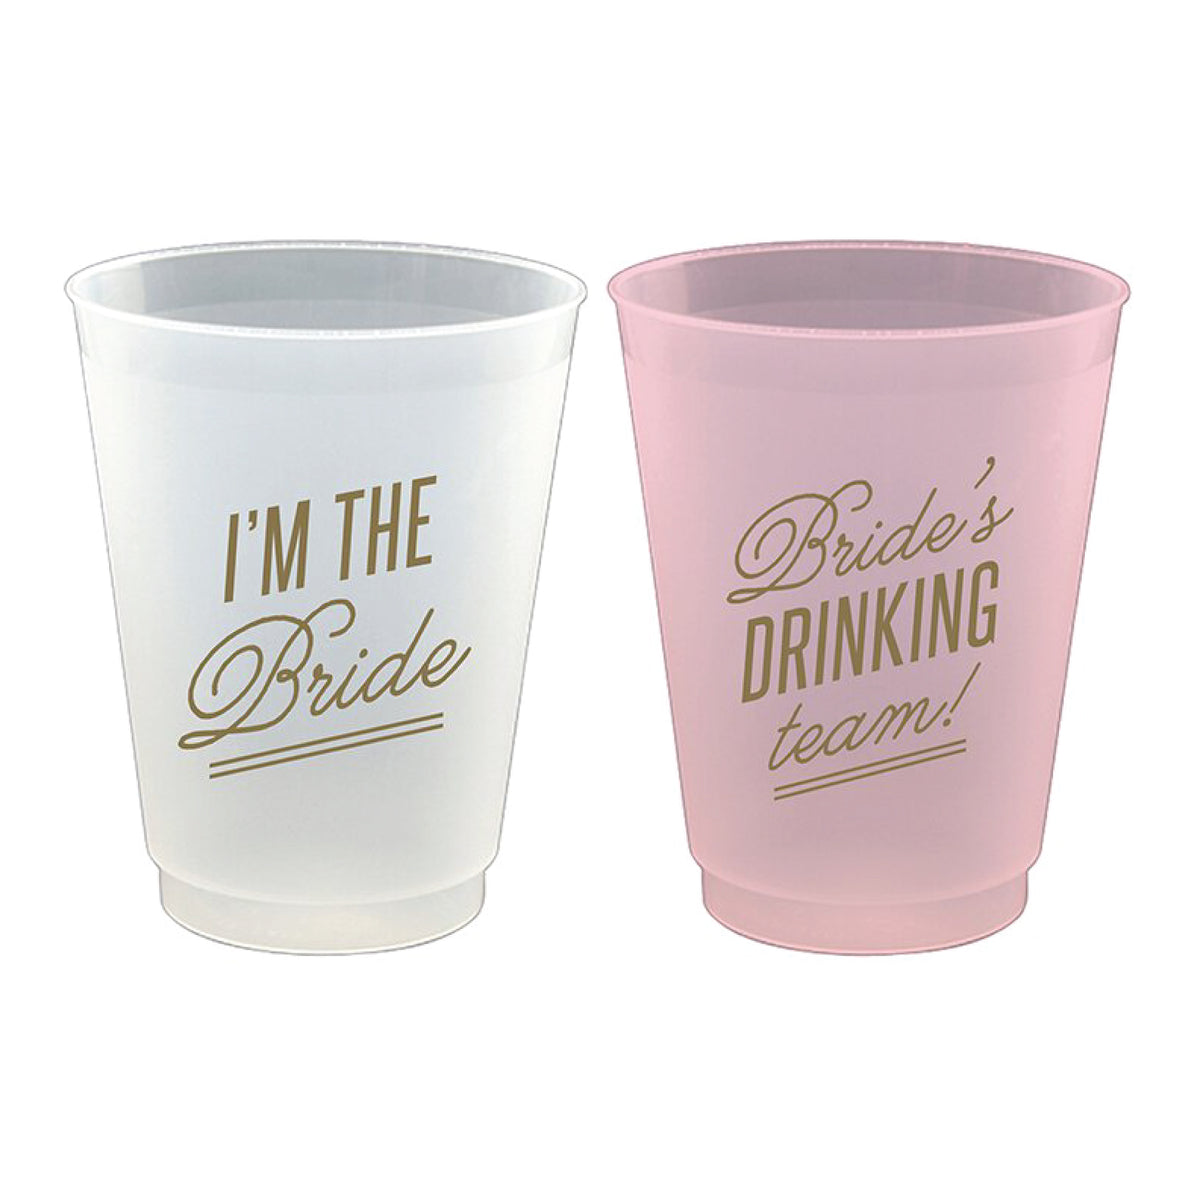 Team Groom - 16 ounce Plastic Cups with Lid & Straw - Thankful Sweets